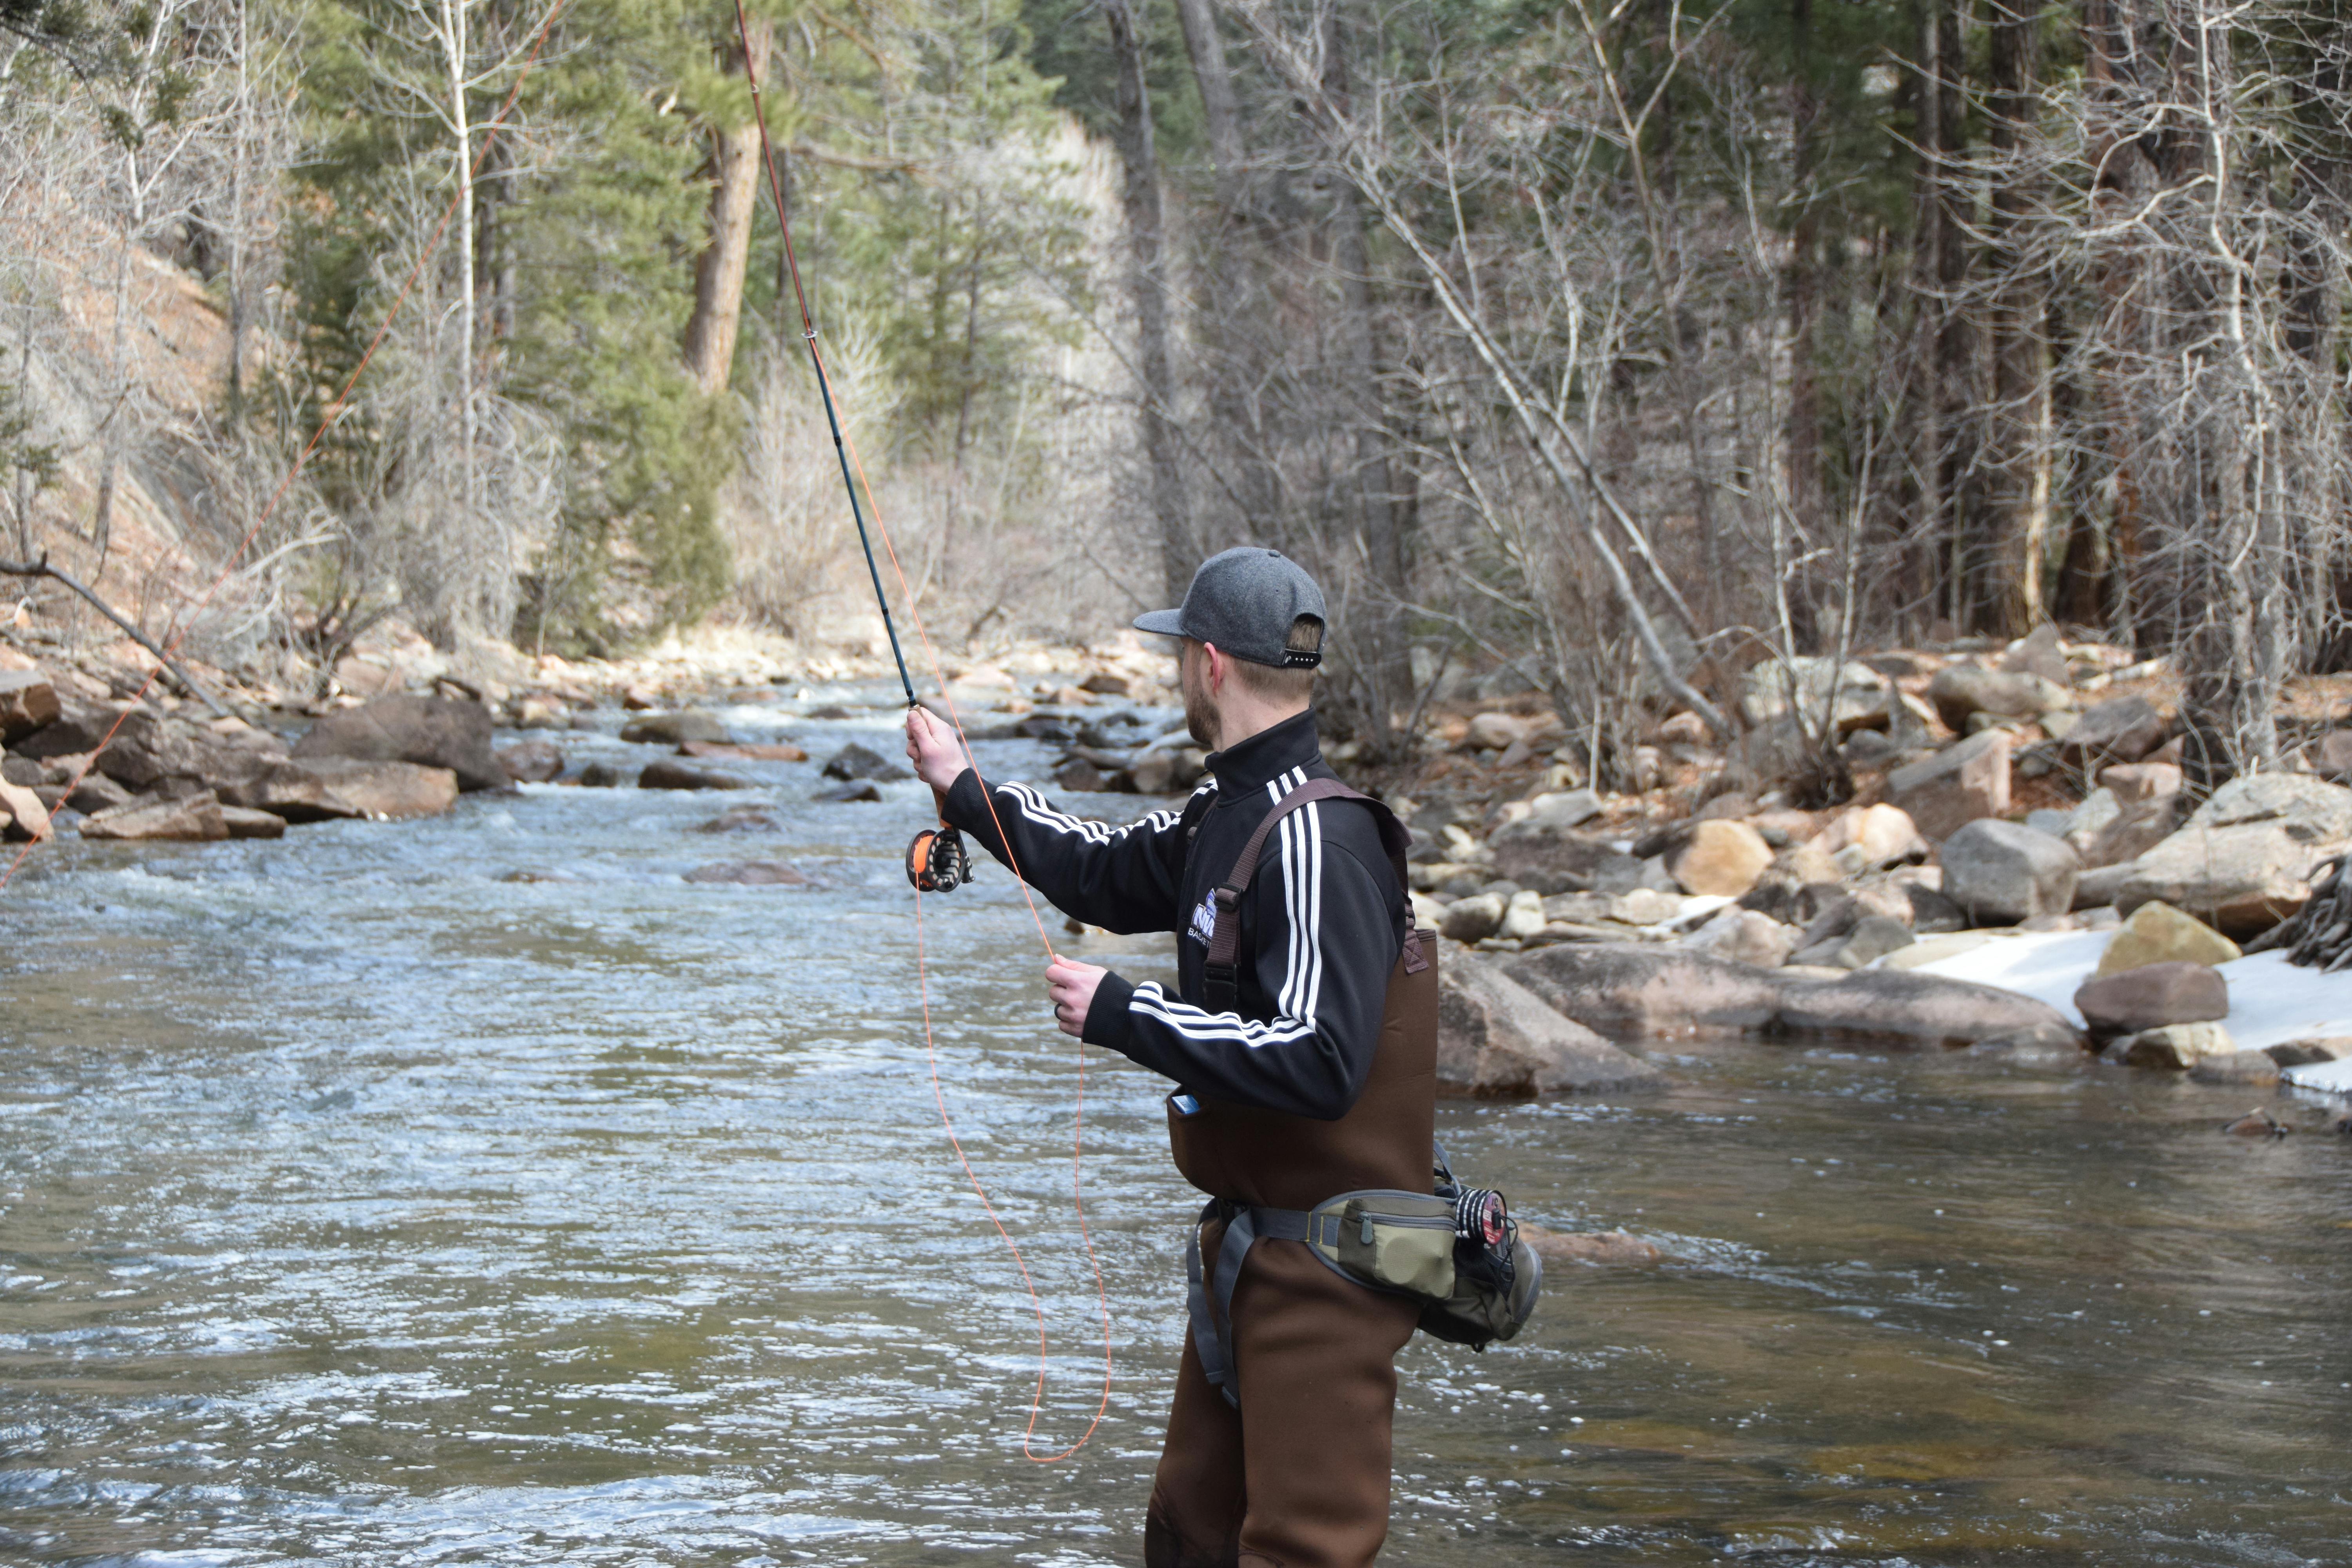 A man in waders fly fishes in a river.